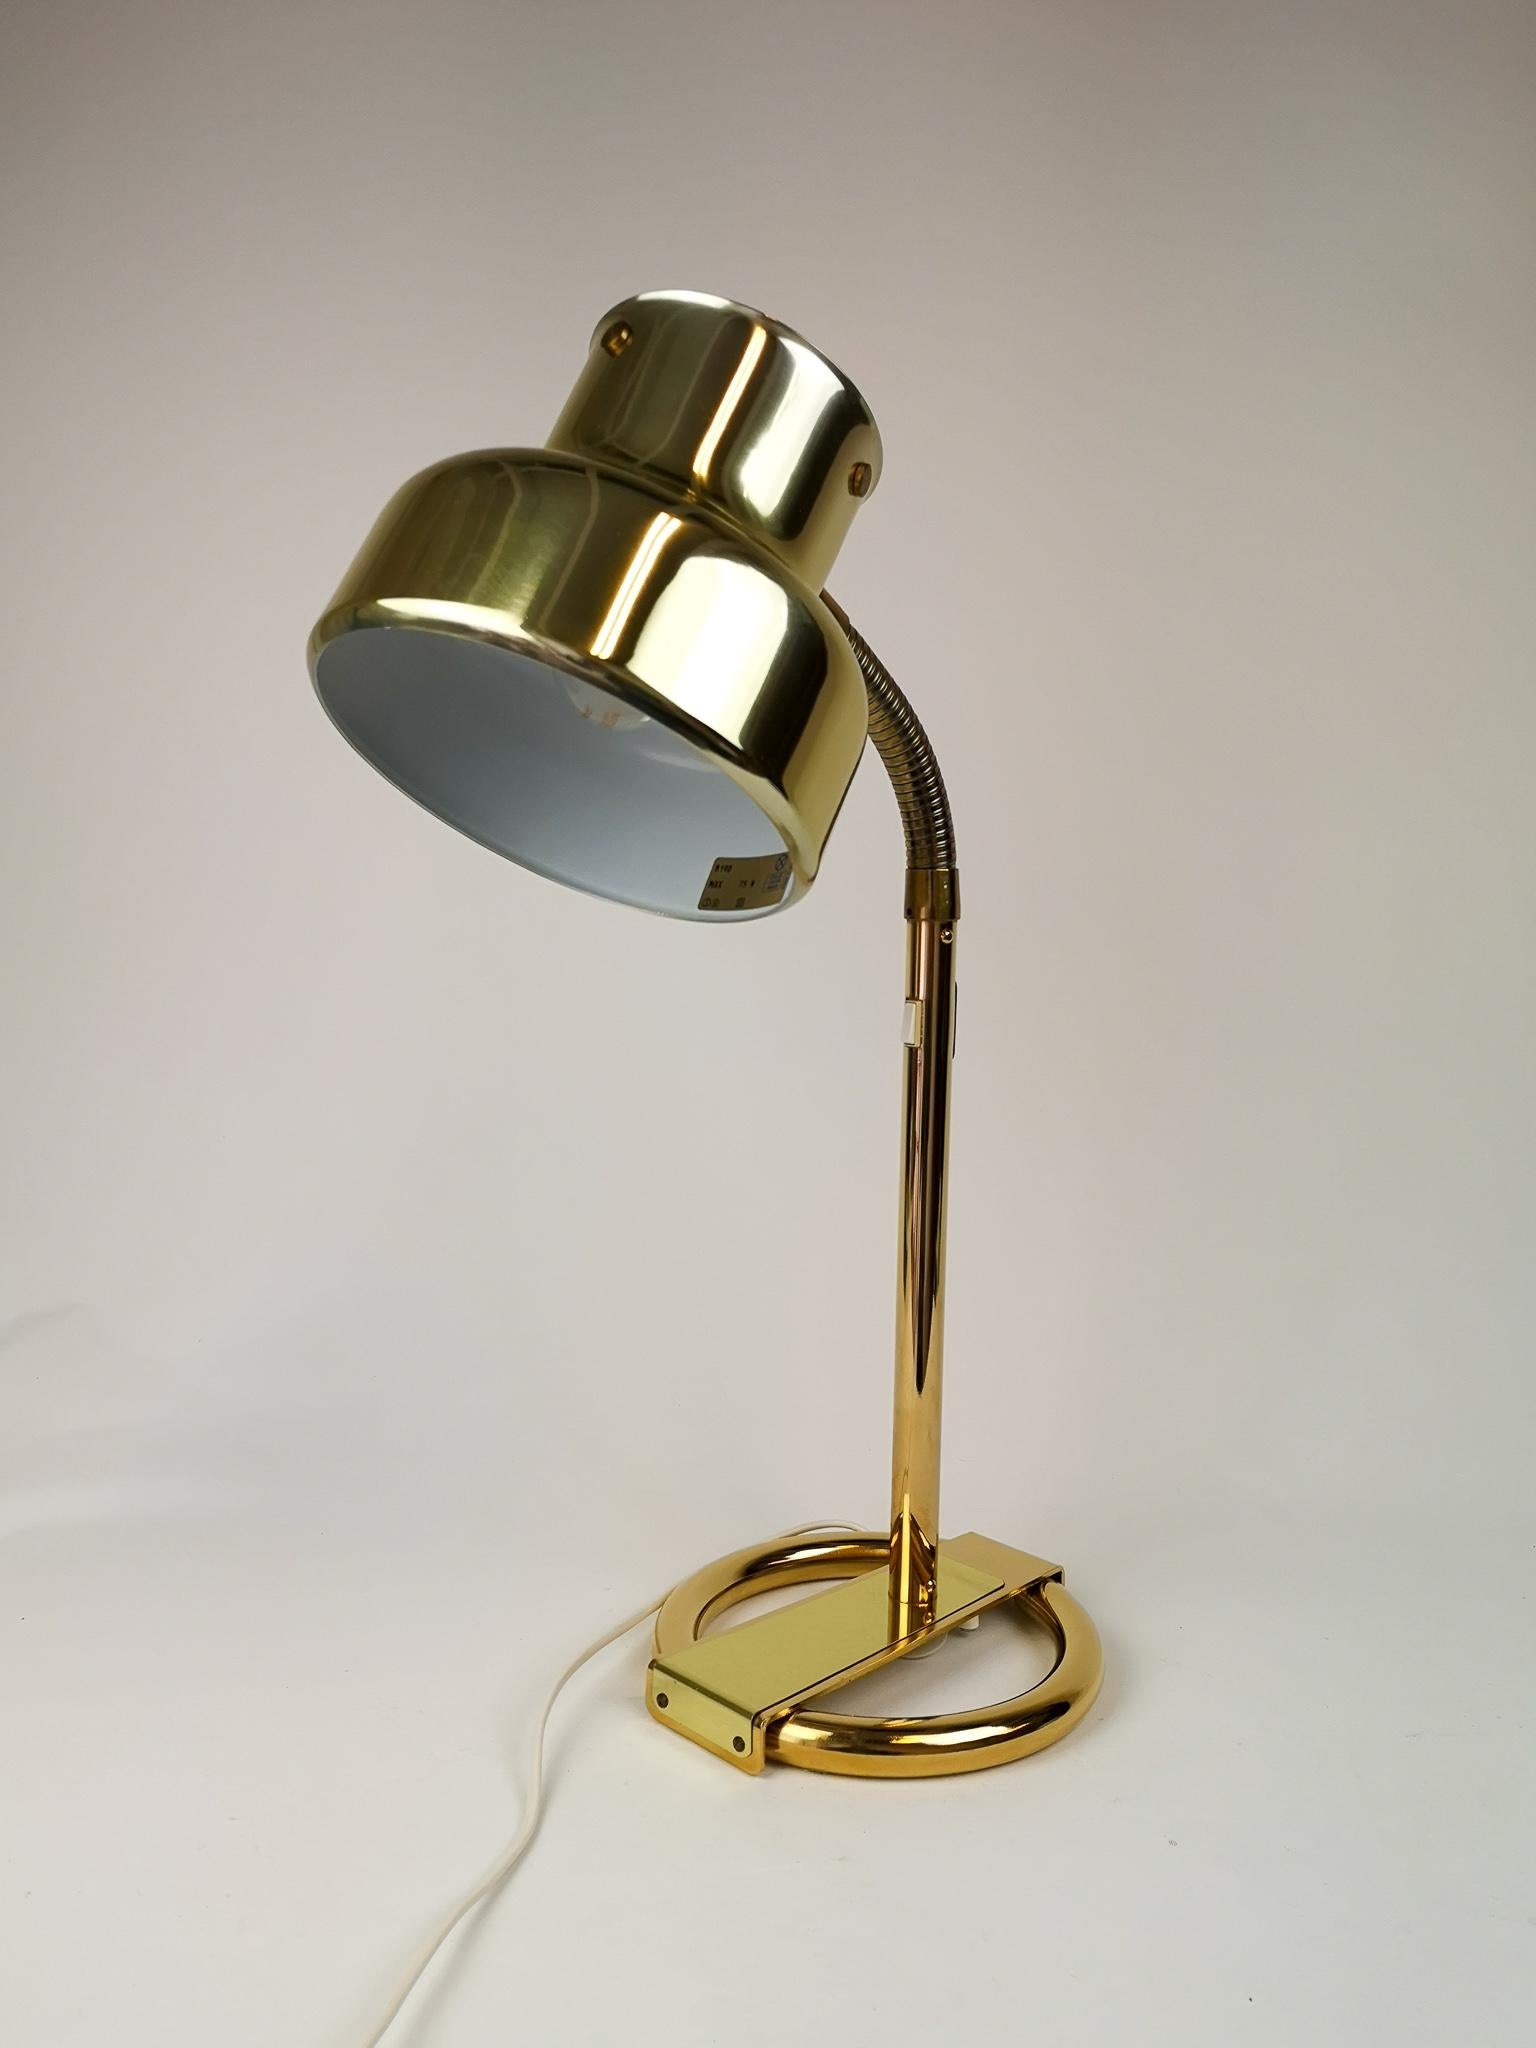 This 1960s table lamp, model Bumling, was designed by Anders Pehrson for Ateljé Lyktan in Åhus, Sweden. This table lamp with its brass featuers is a nice edition to your writing desk or small table. 

Nice working vintage condition.

Measures: H